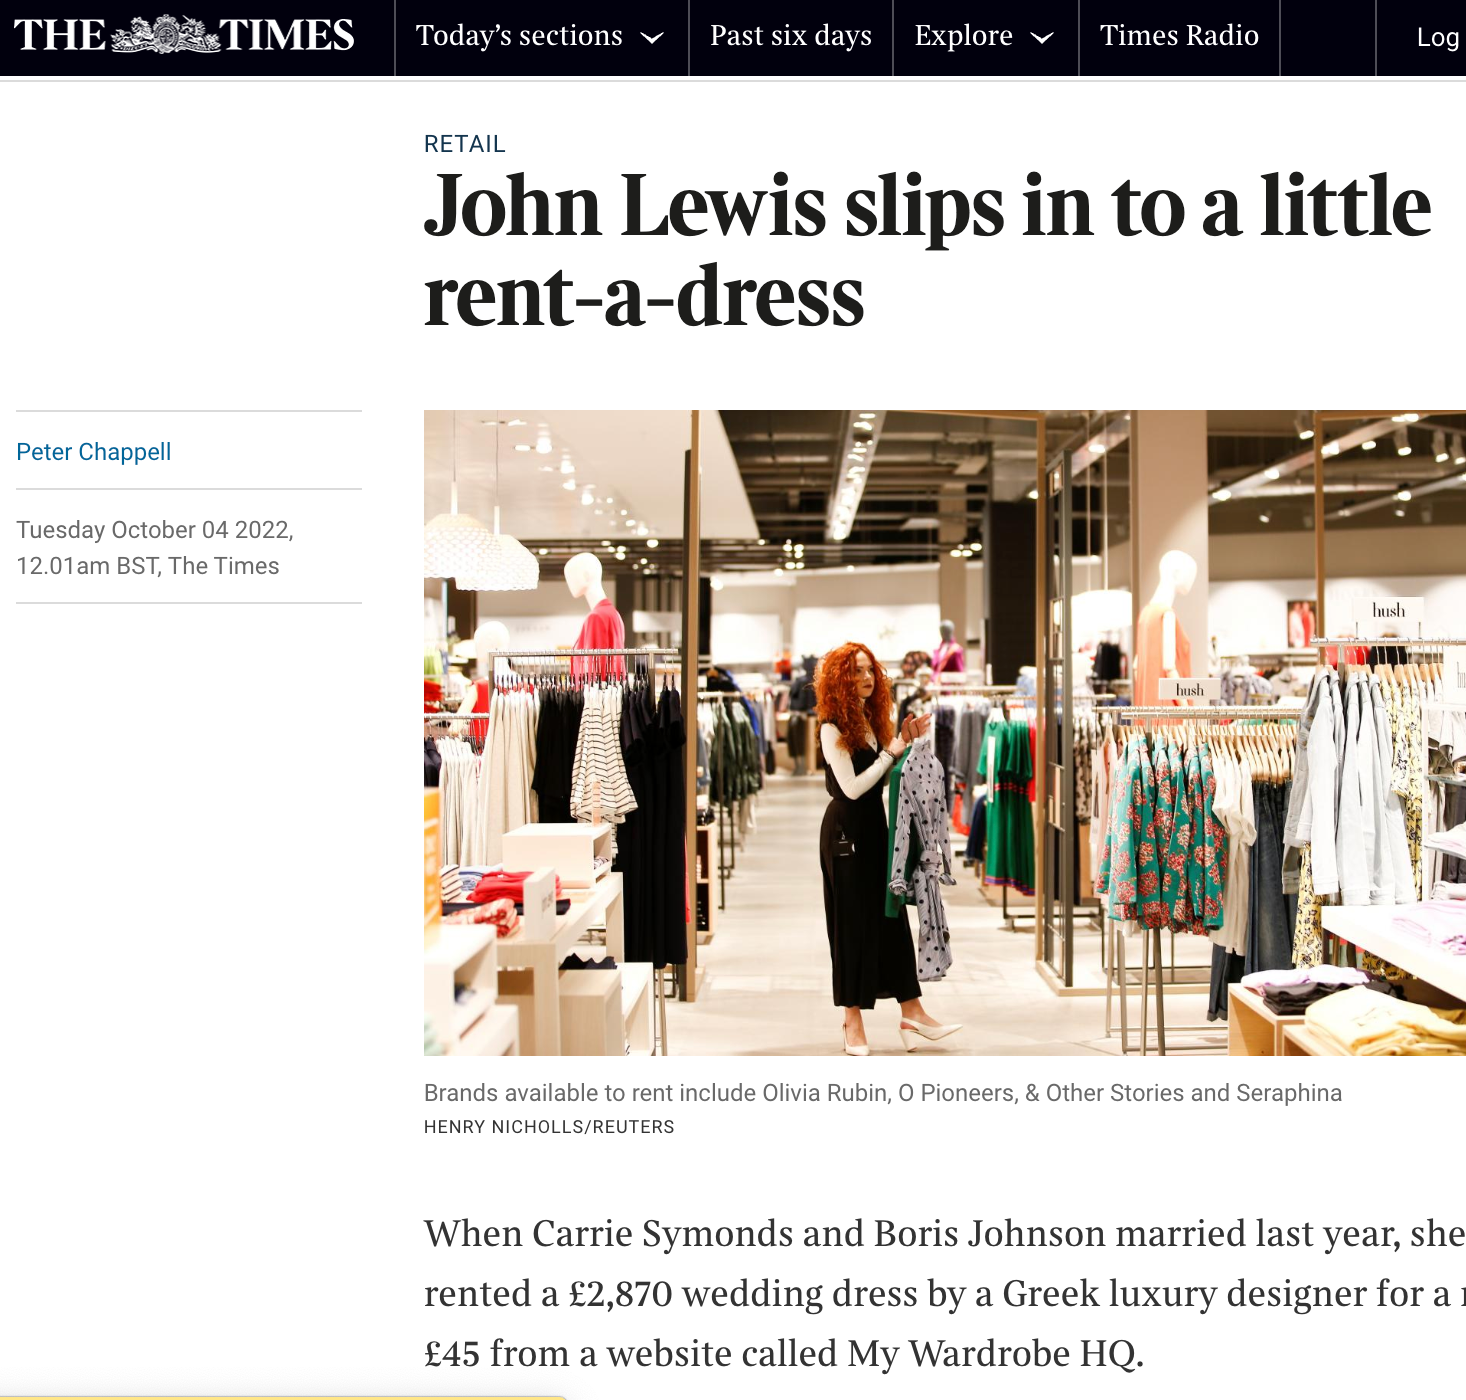 The Times - John Lewis slips in to a little rent-a-dress